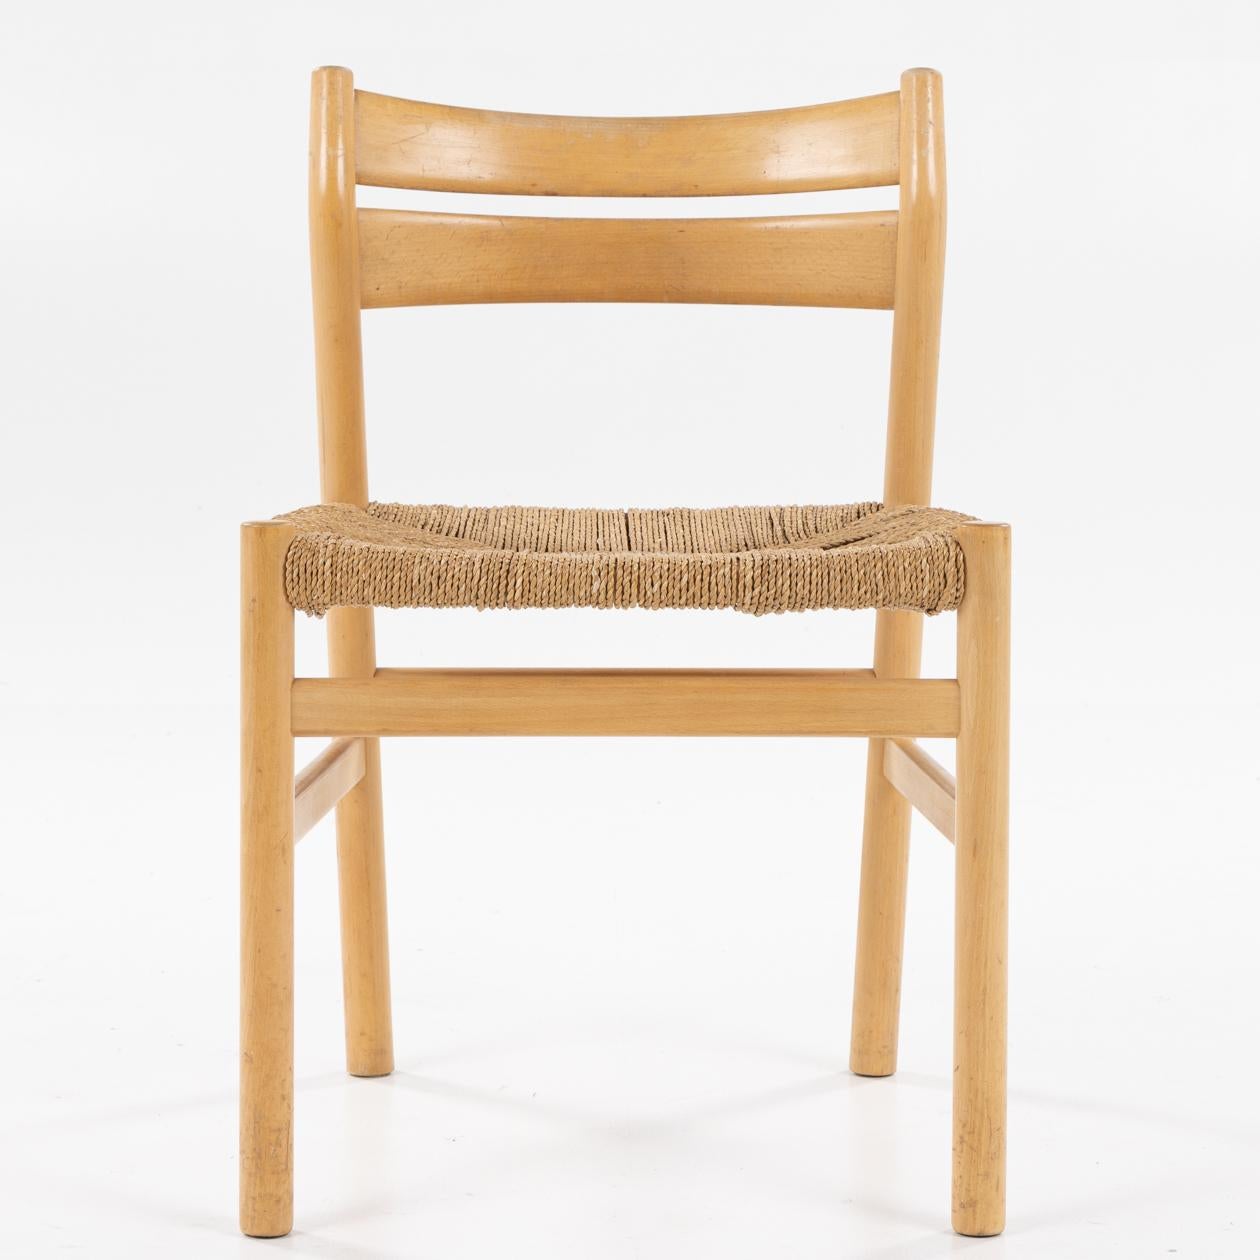 BM 1 - Set of six dining chairs in lacquered beech and seagrass seat. Designed in 1958. Børge Mogensen / C.M Madsen